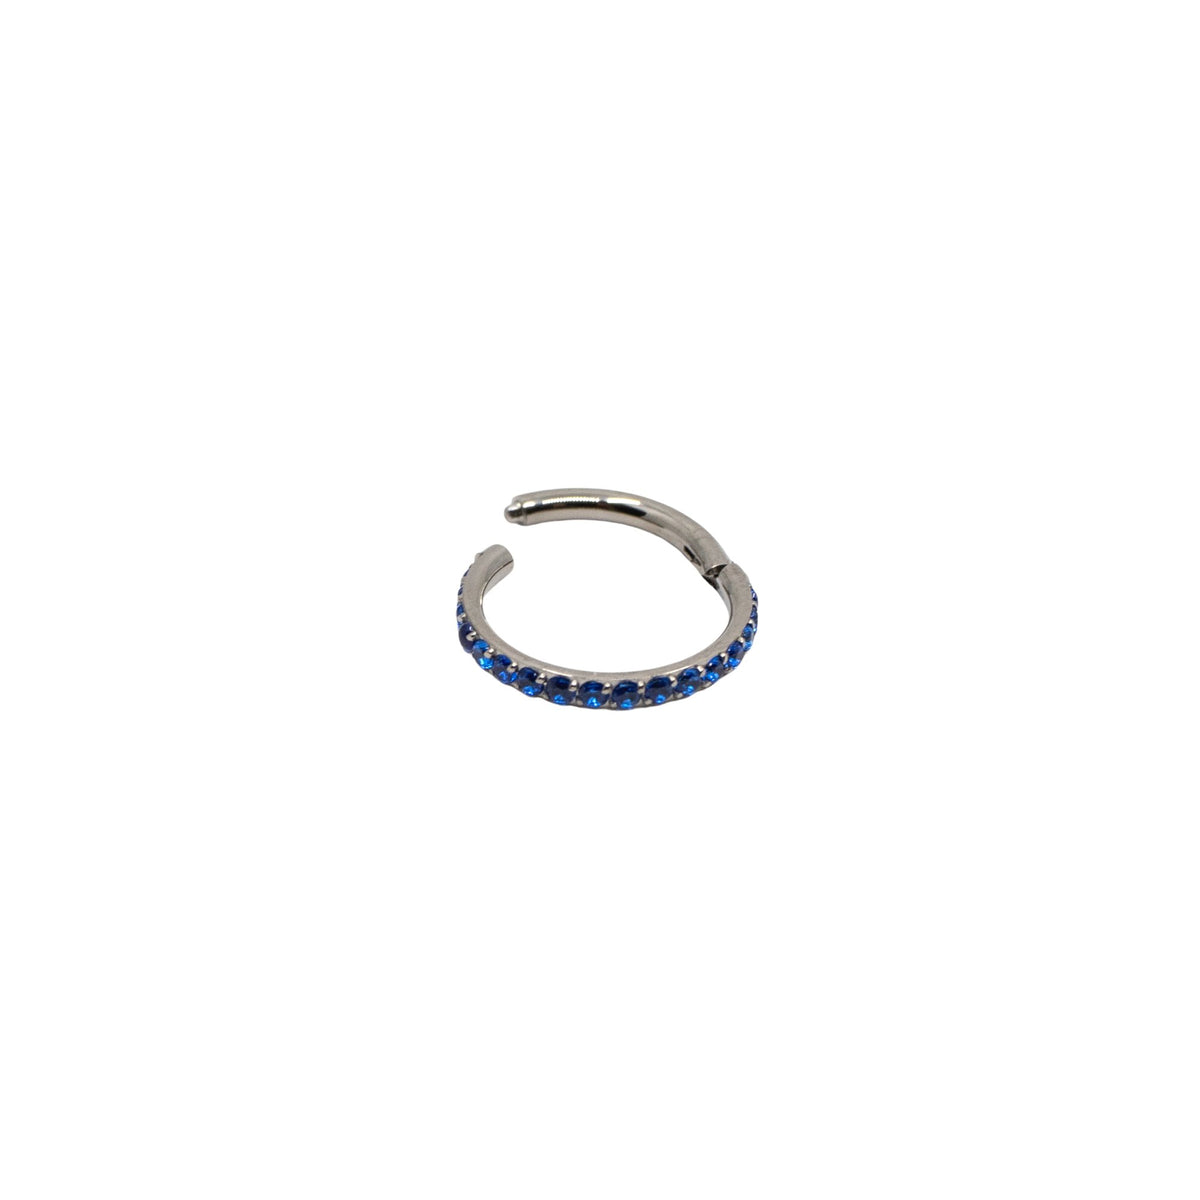 Silver with Blue Hoops Bottom-Facing Crystal Clicker Hoop The Curated Lobeblackcartilagecartilage jewelry